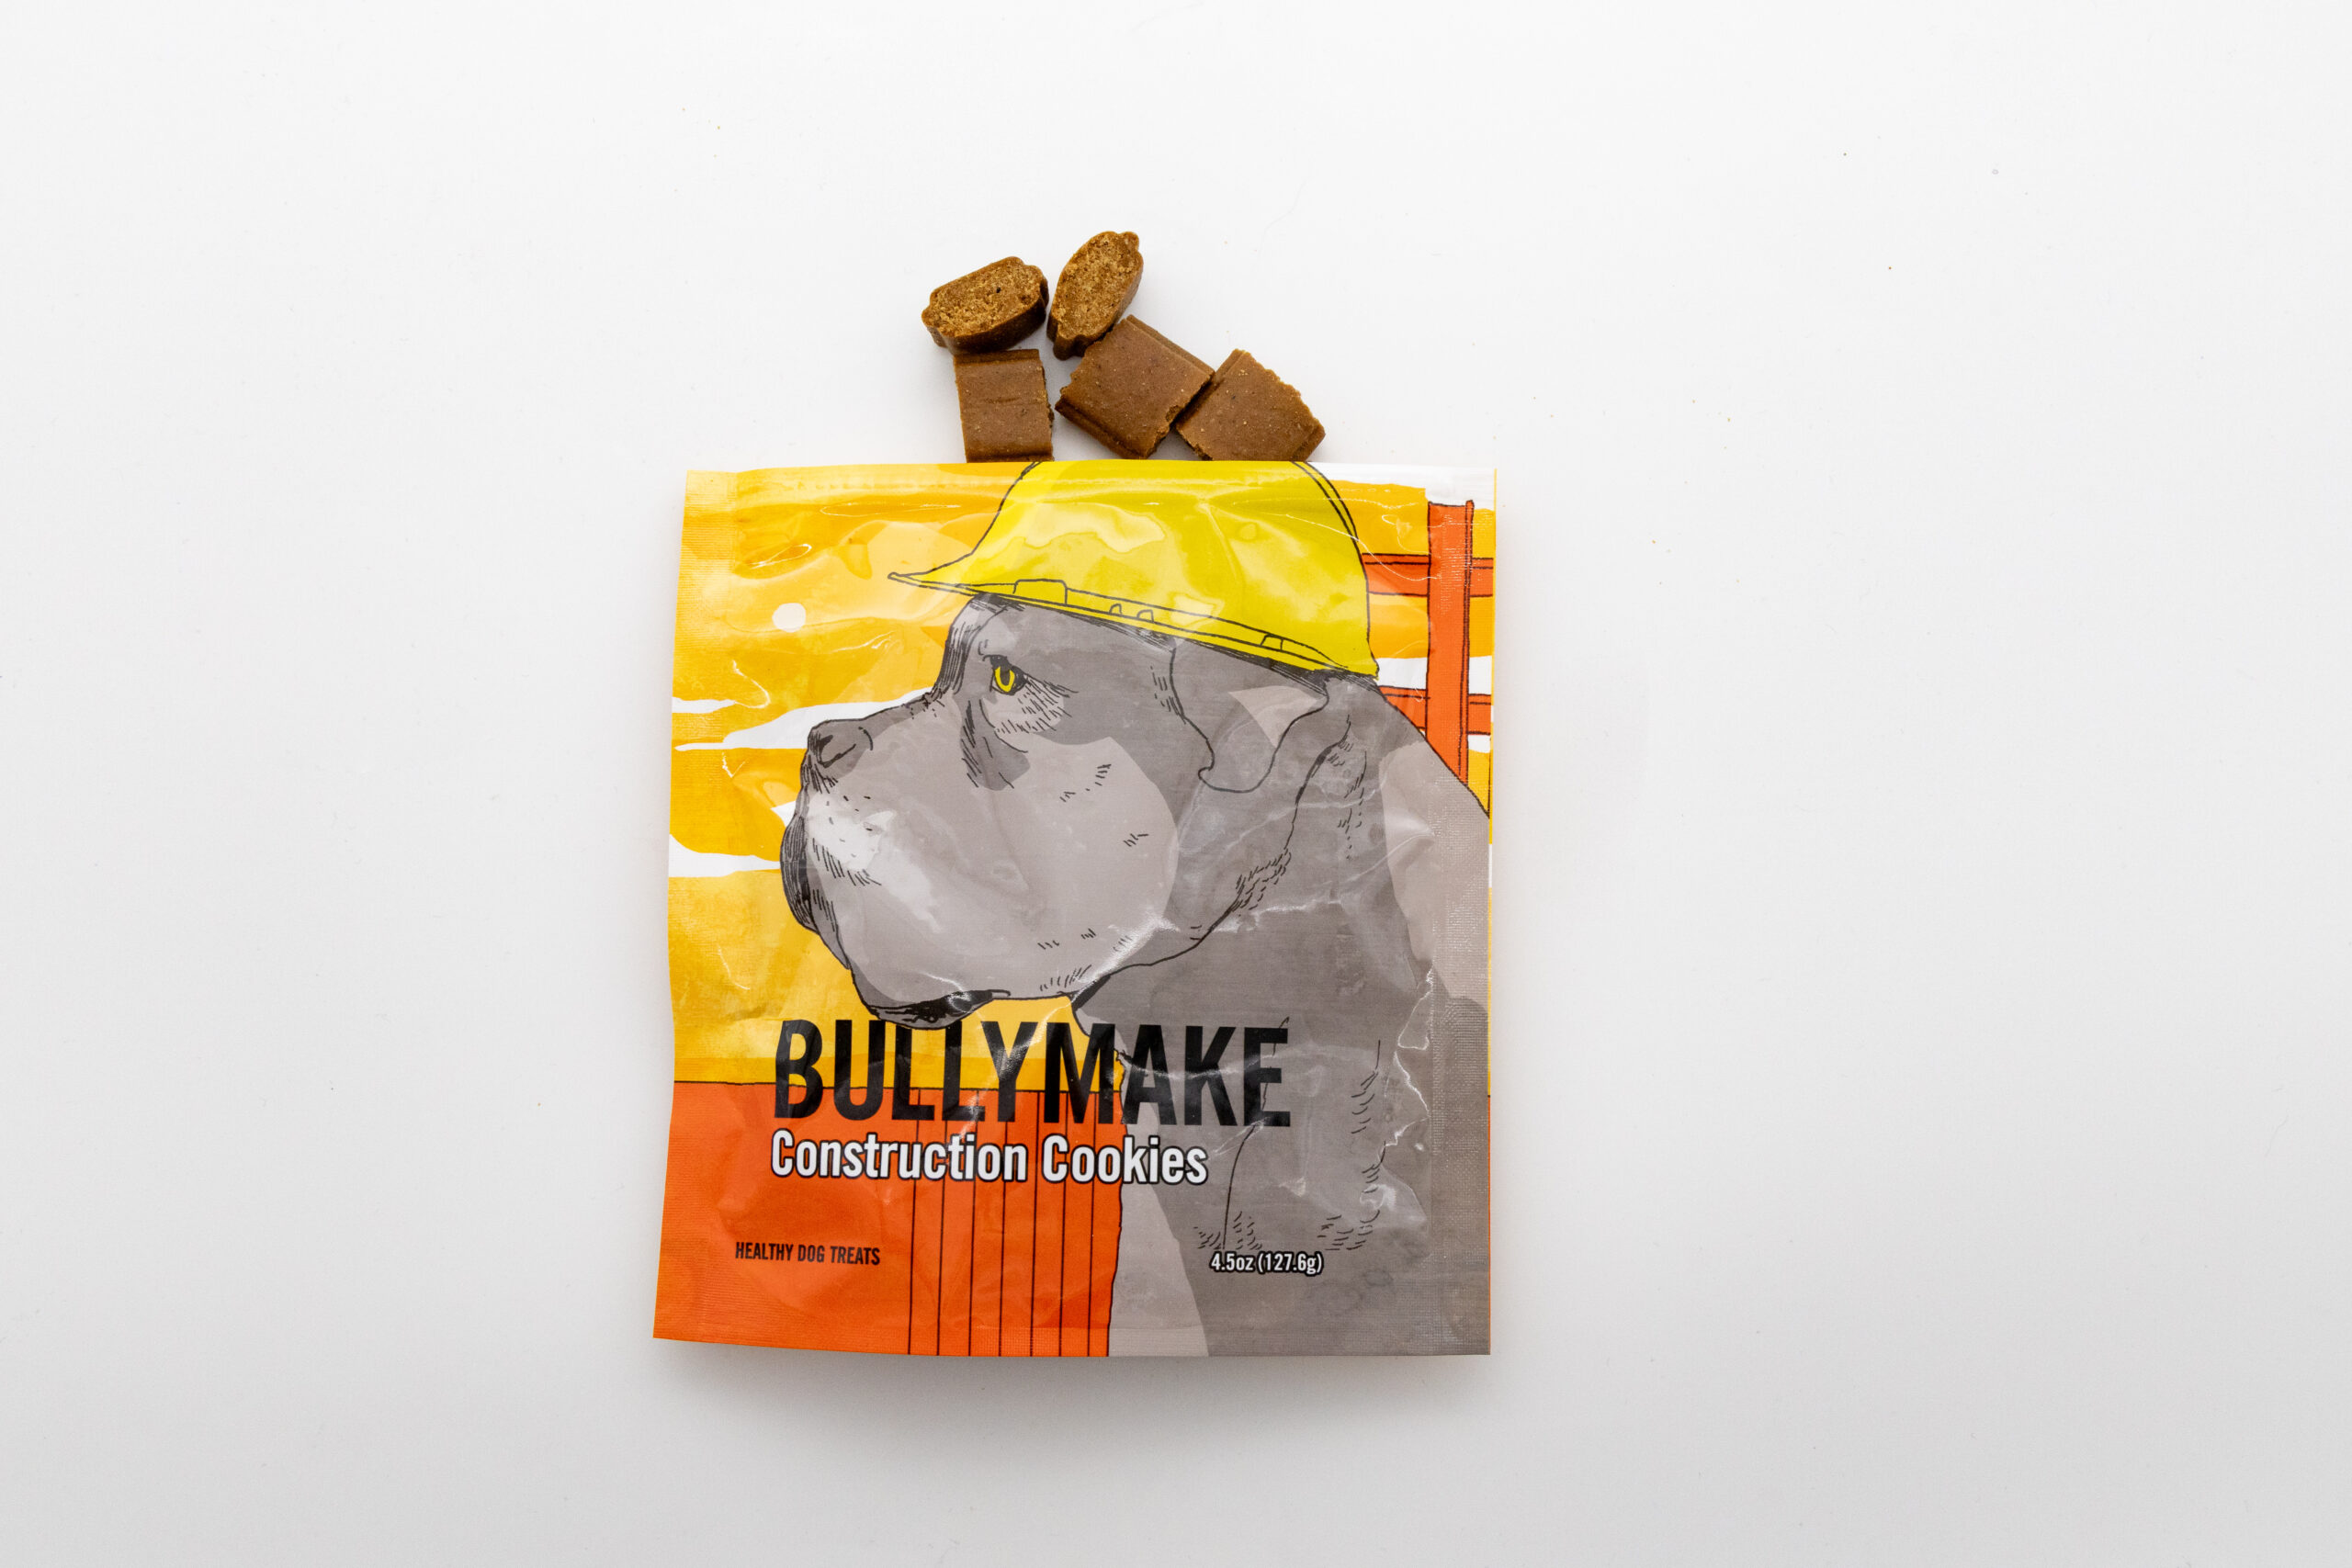 Construction Cookies by Bullymake